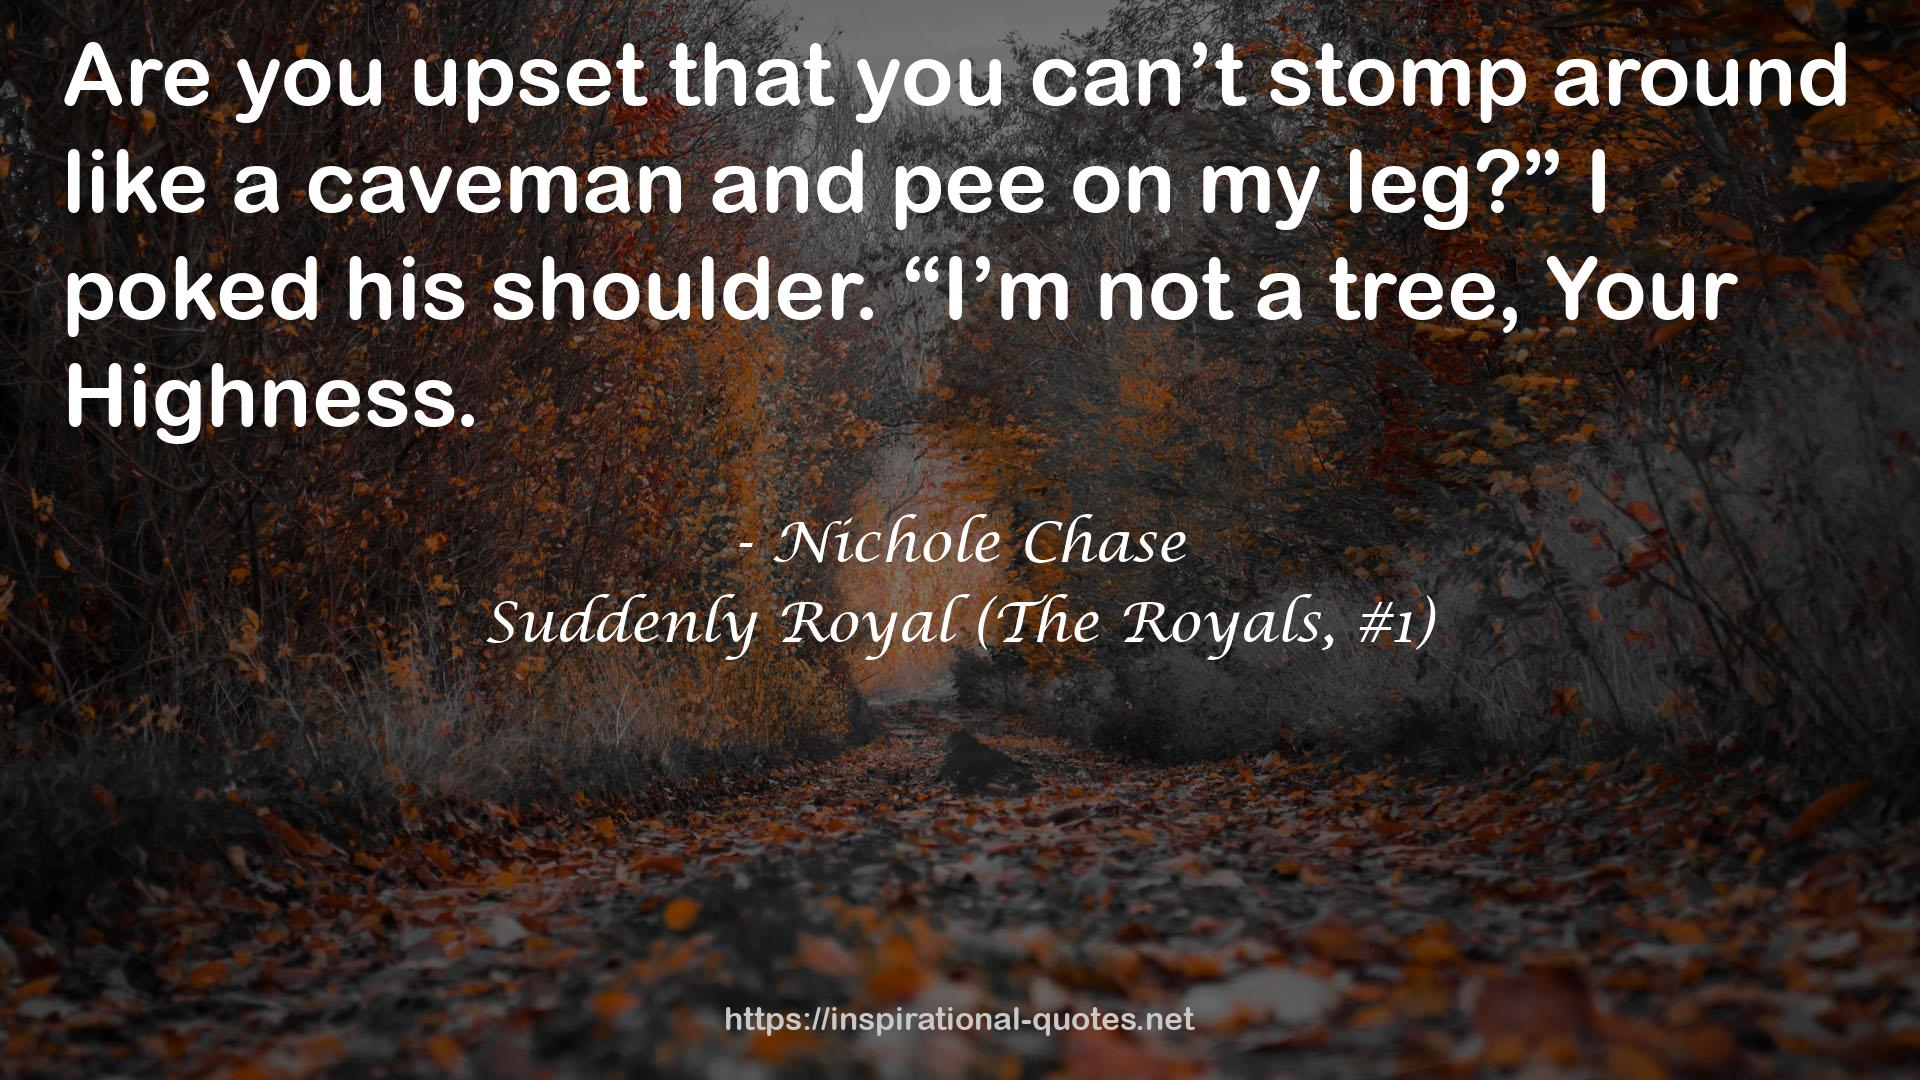 Nichole Chase QUOTES